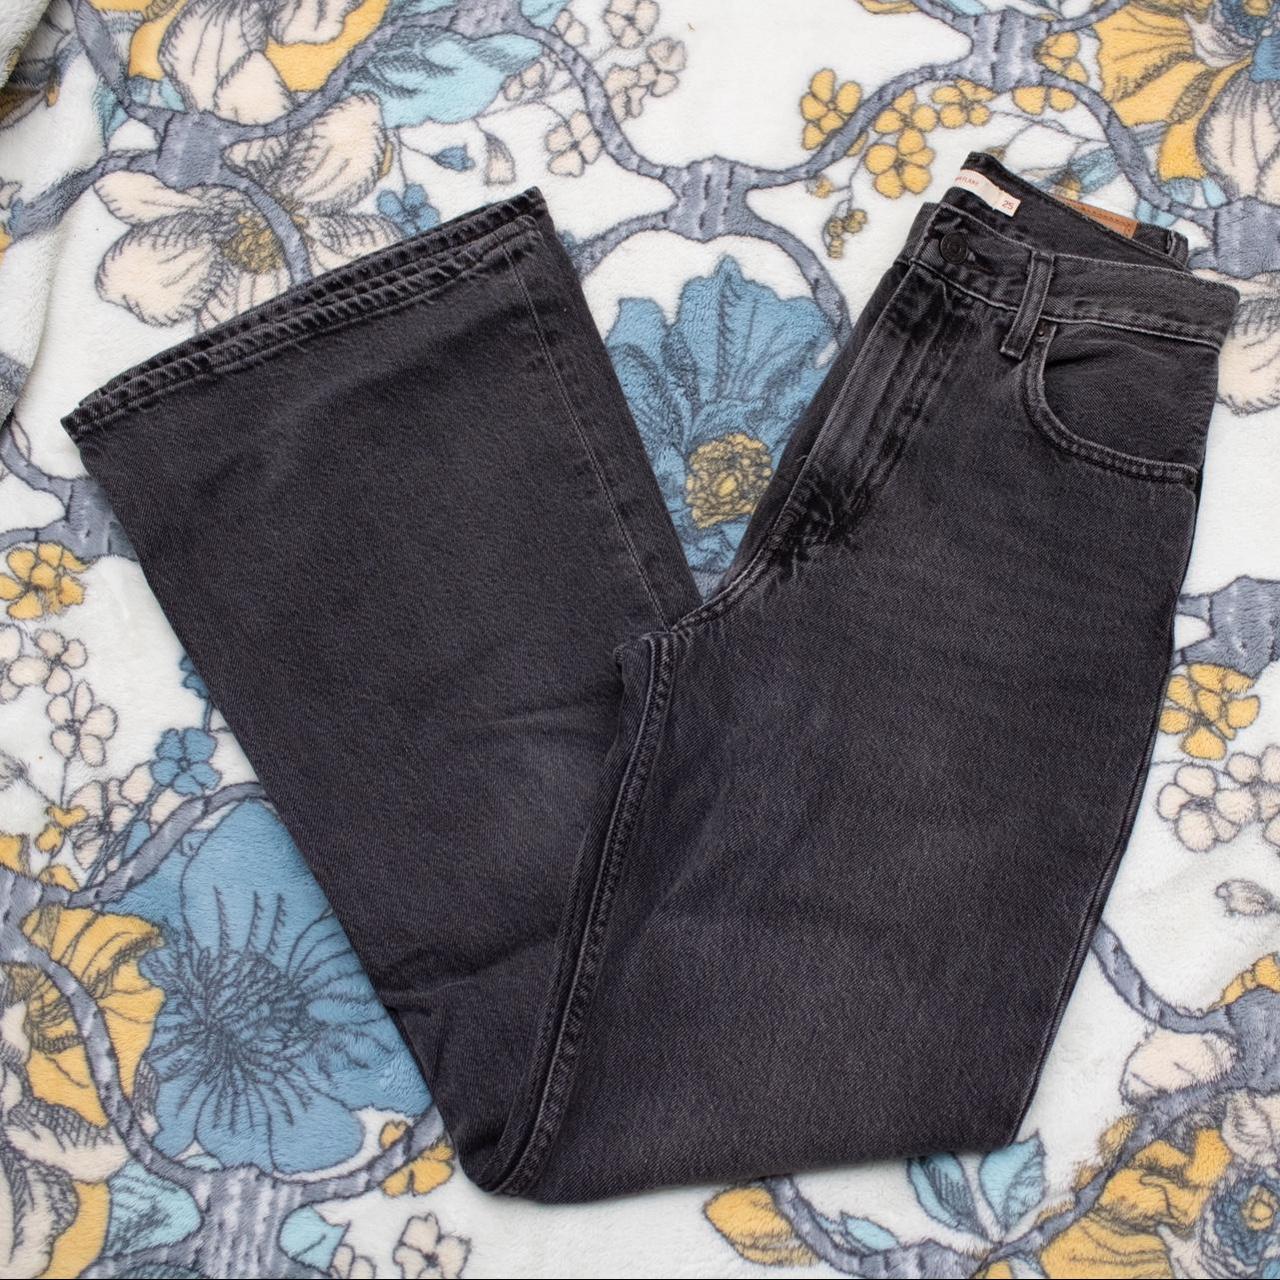 Black 70's High Flare Jeans by Levi's on Sale